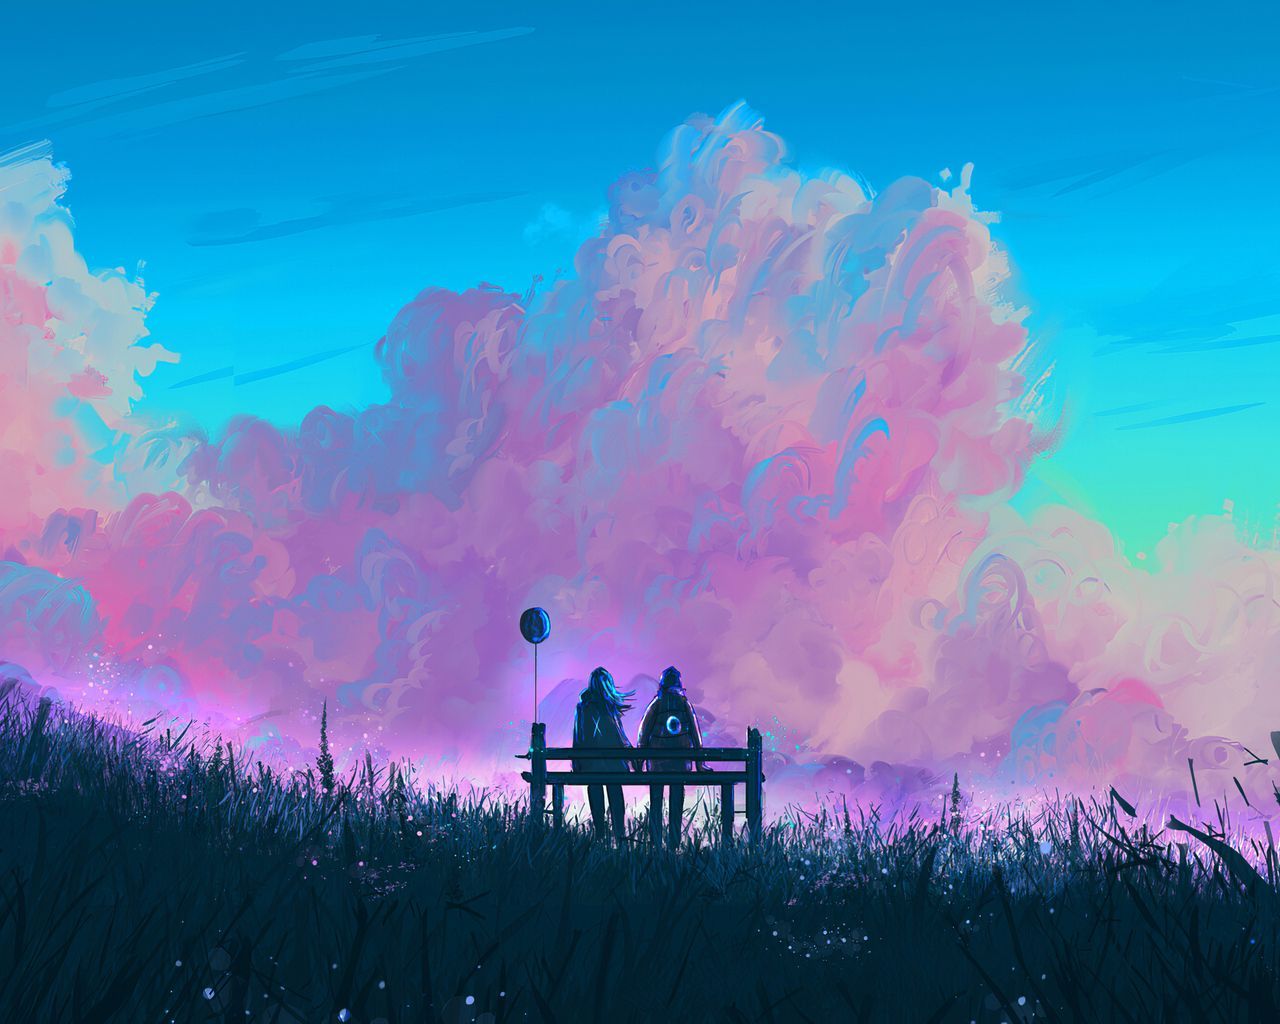 A digital painting of two people sitting on a bench looking at the sky. - 1280x1024